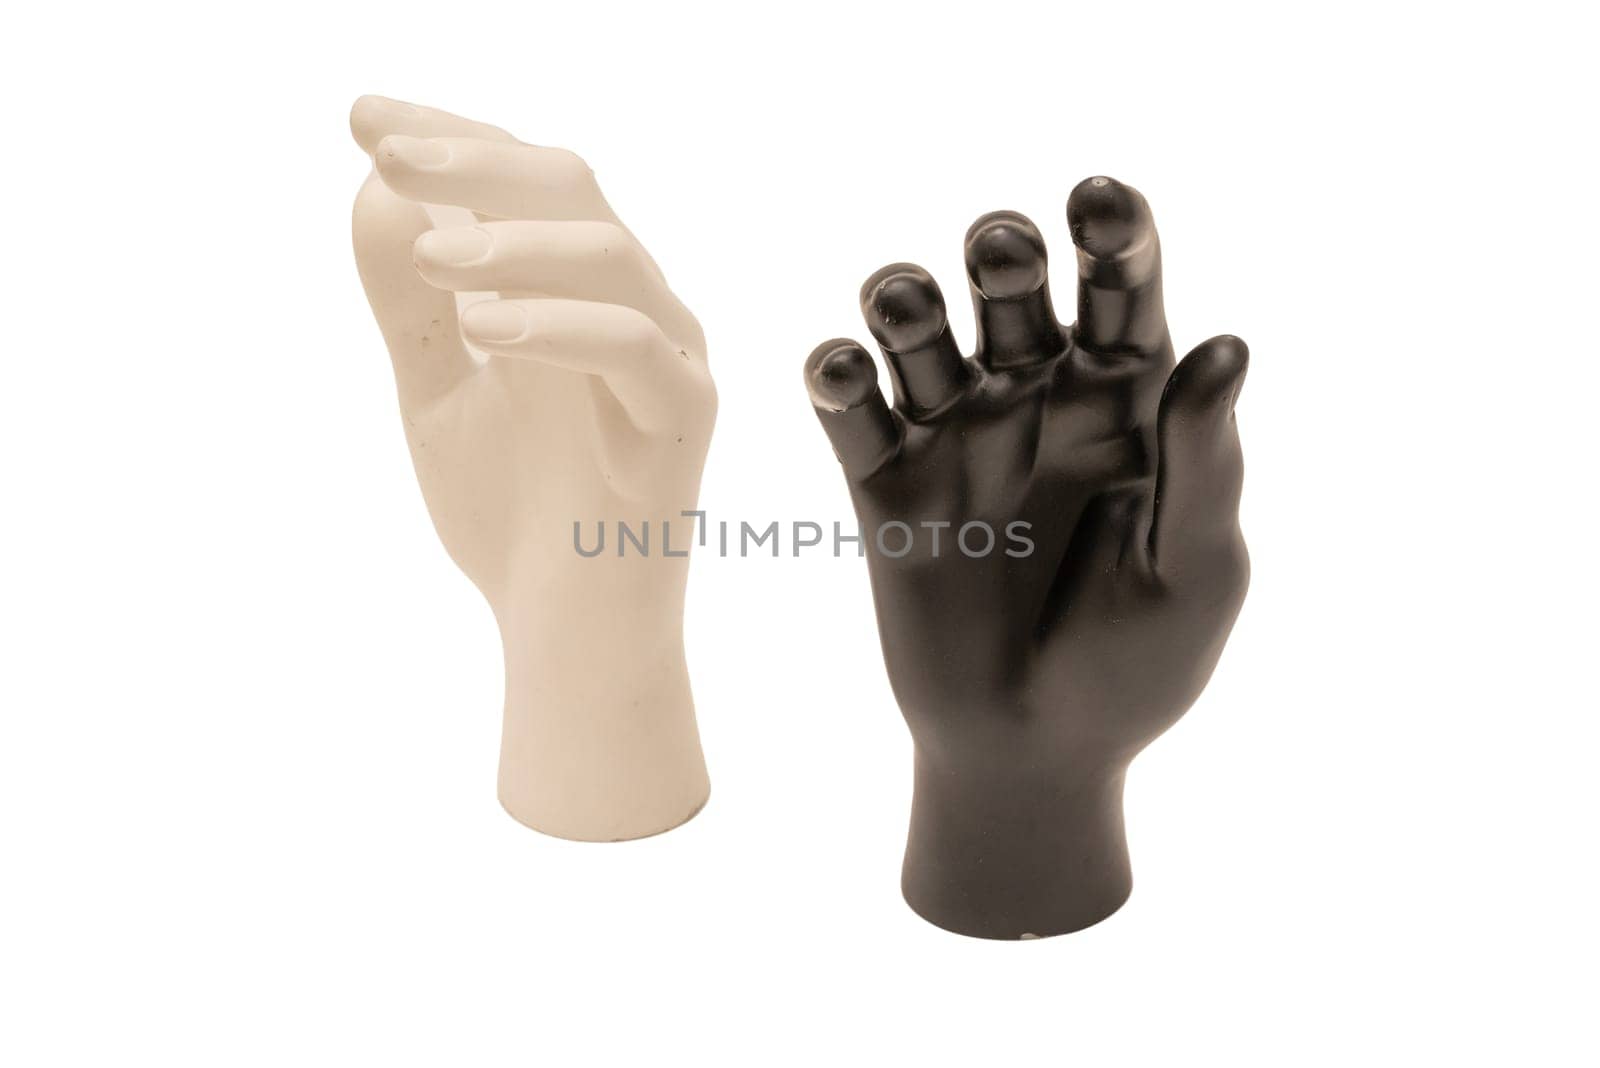 Old shabby mannequin hands on a white background by zartarn